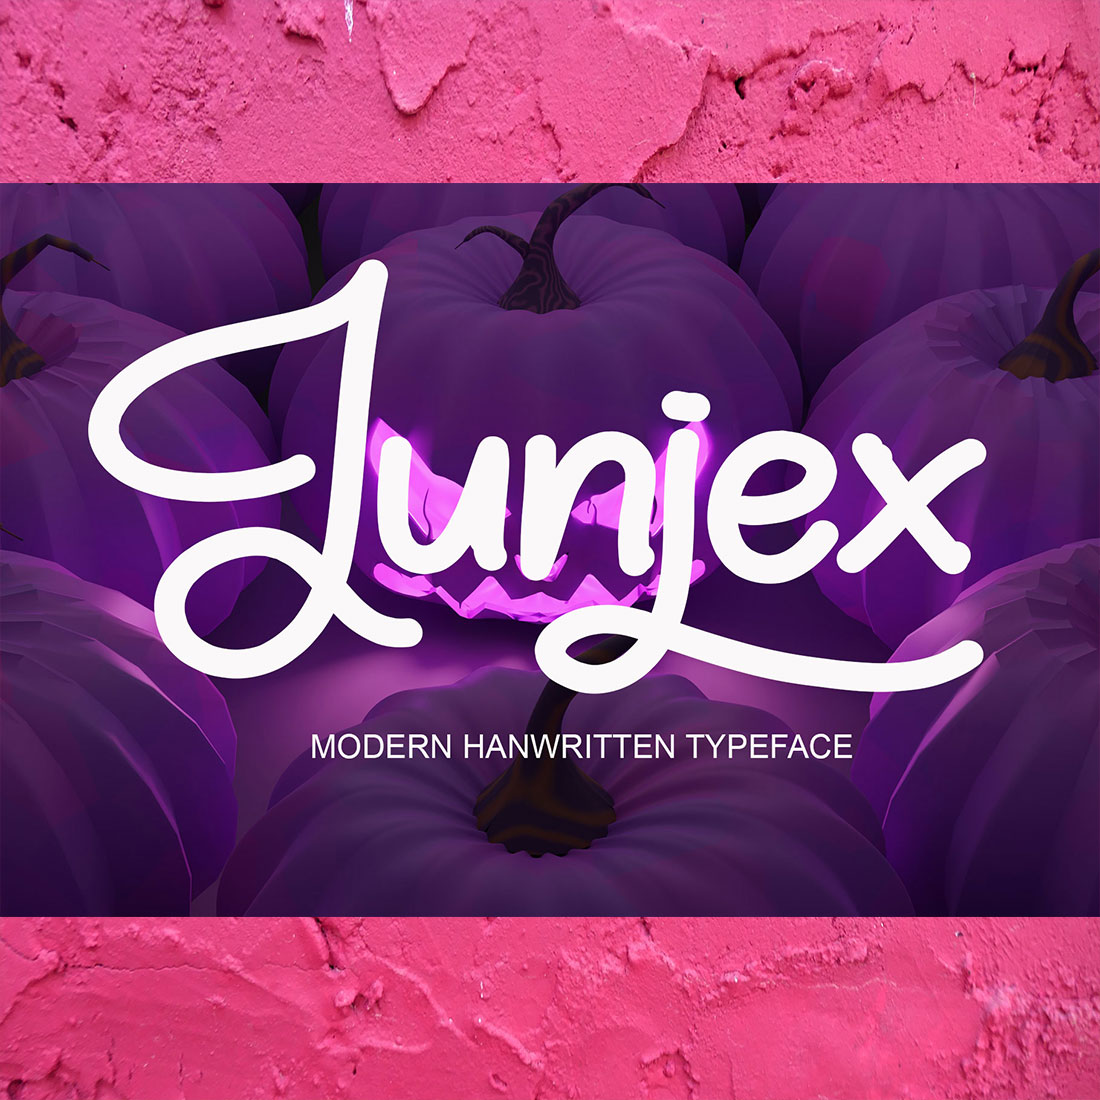 Cover of gorgeous font Junjex.